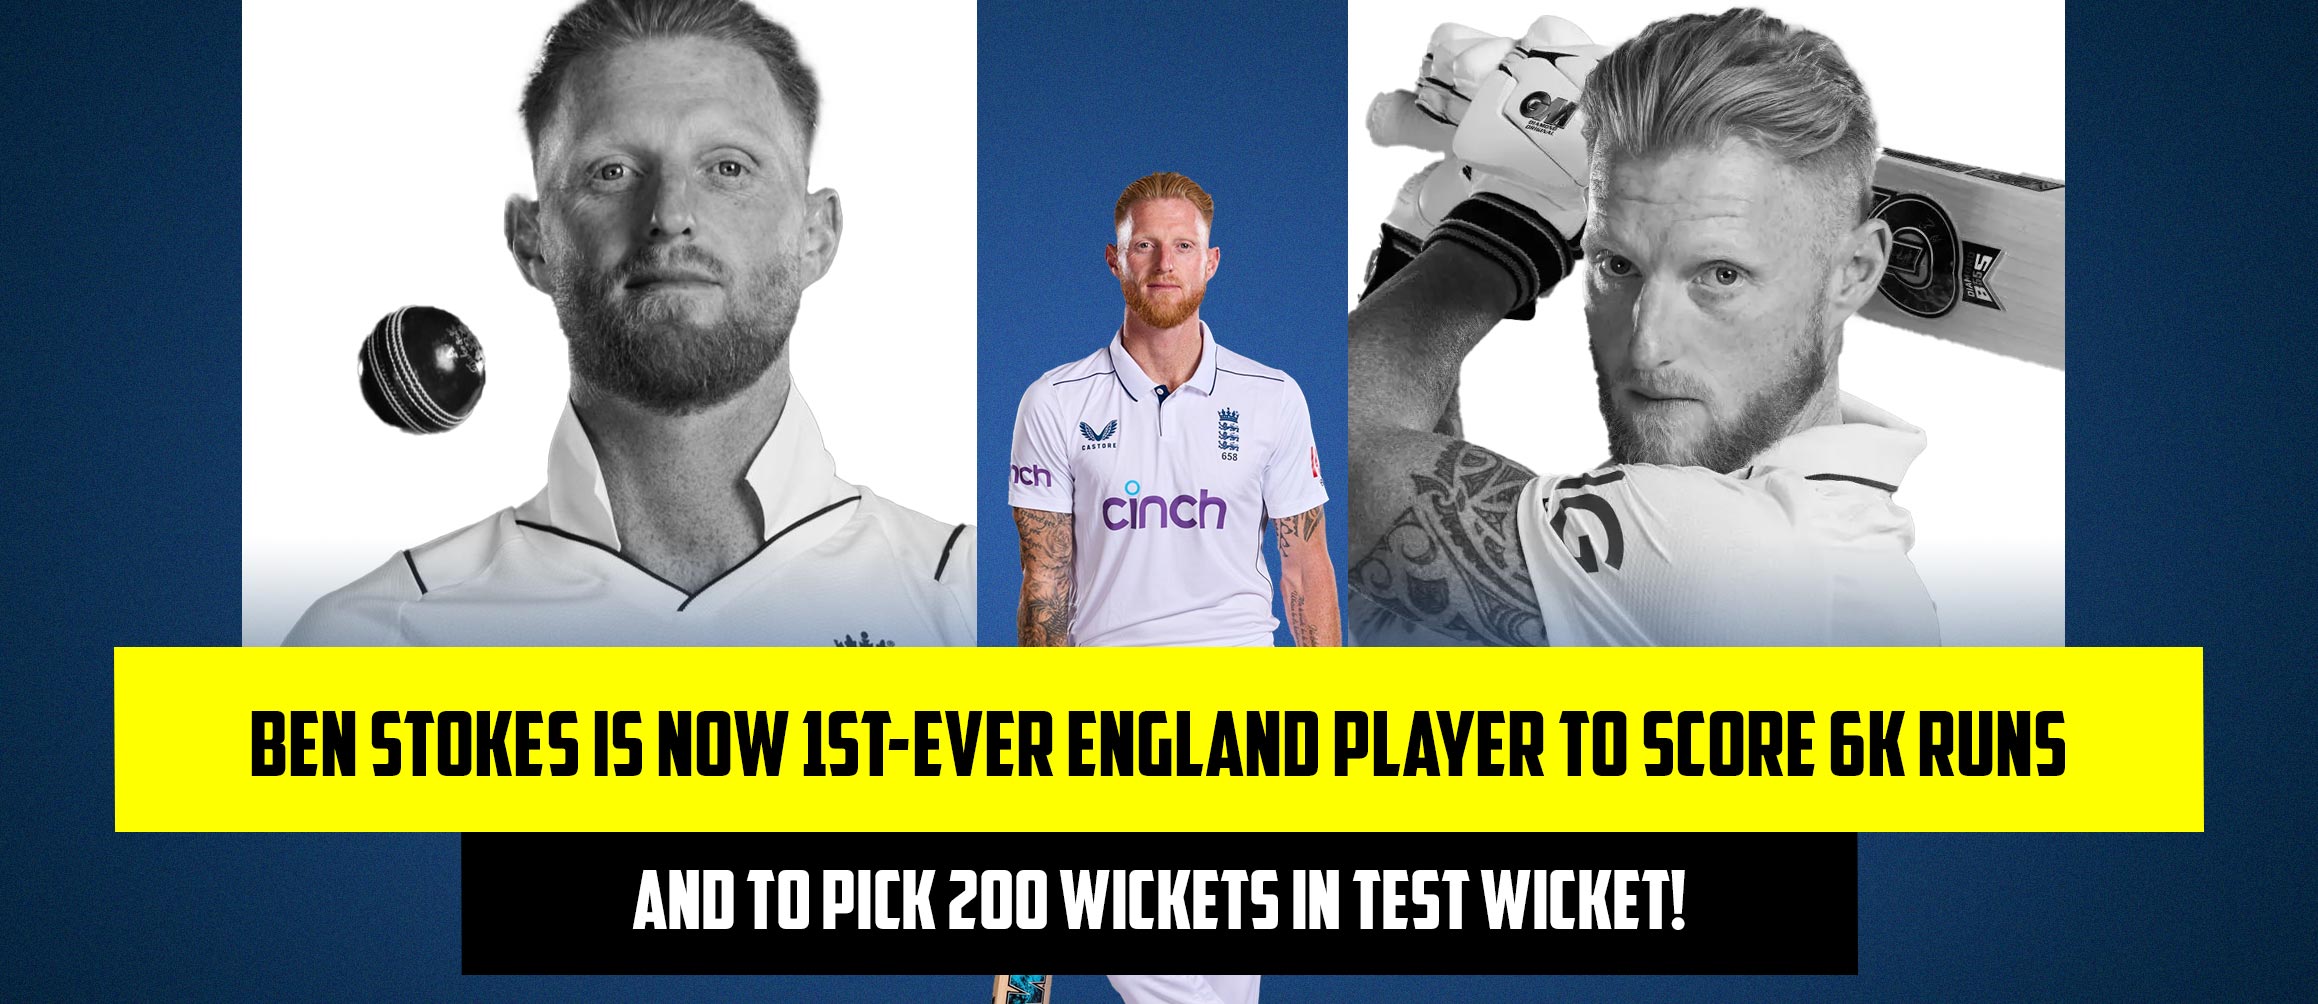 Ben Stokes is Now 1ST-Ever England Player to Score 6k Runs and to Pick 200 Wickets in Test Wicket!